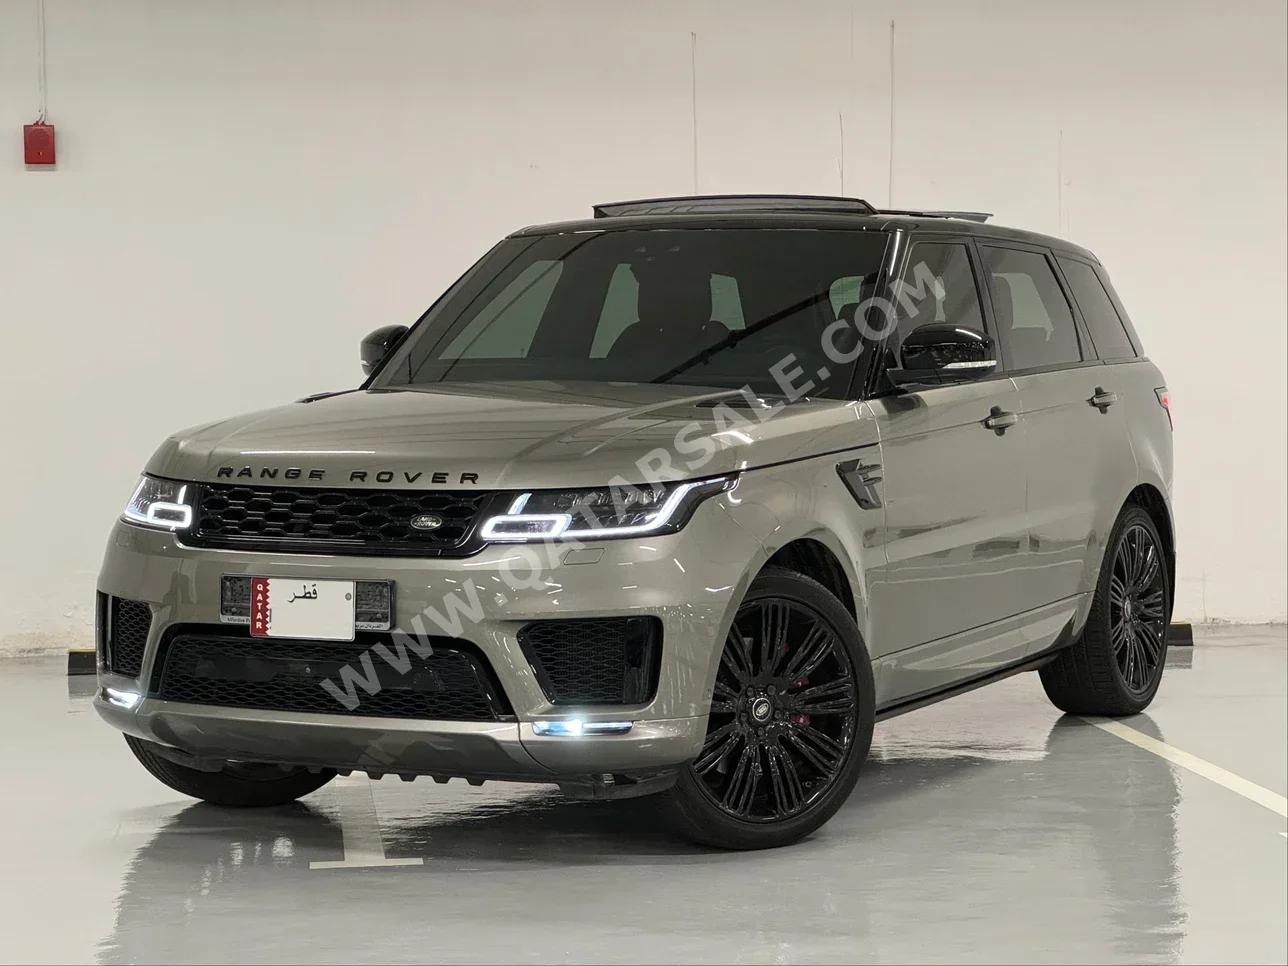 Land Rover  Range Rover  Sport Autobiography  2018  Automatic  99,000 Km  8 Cylinder  Four Wheel Drive (4WD)  SUV  Silver